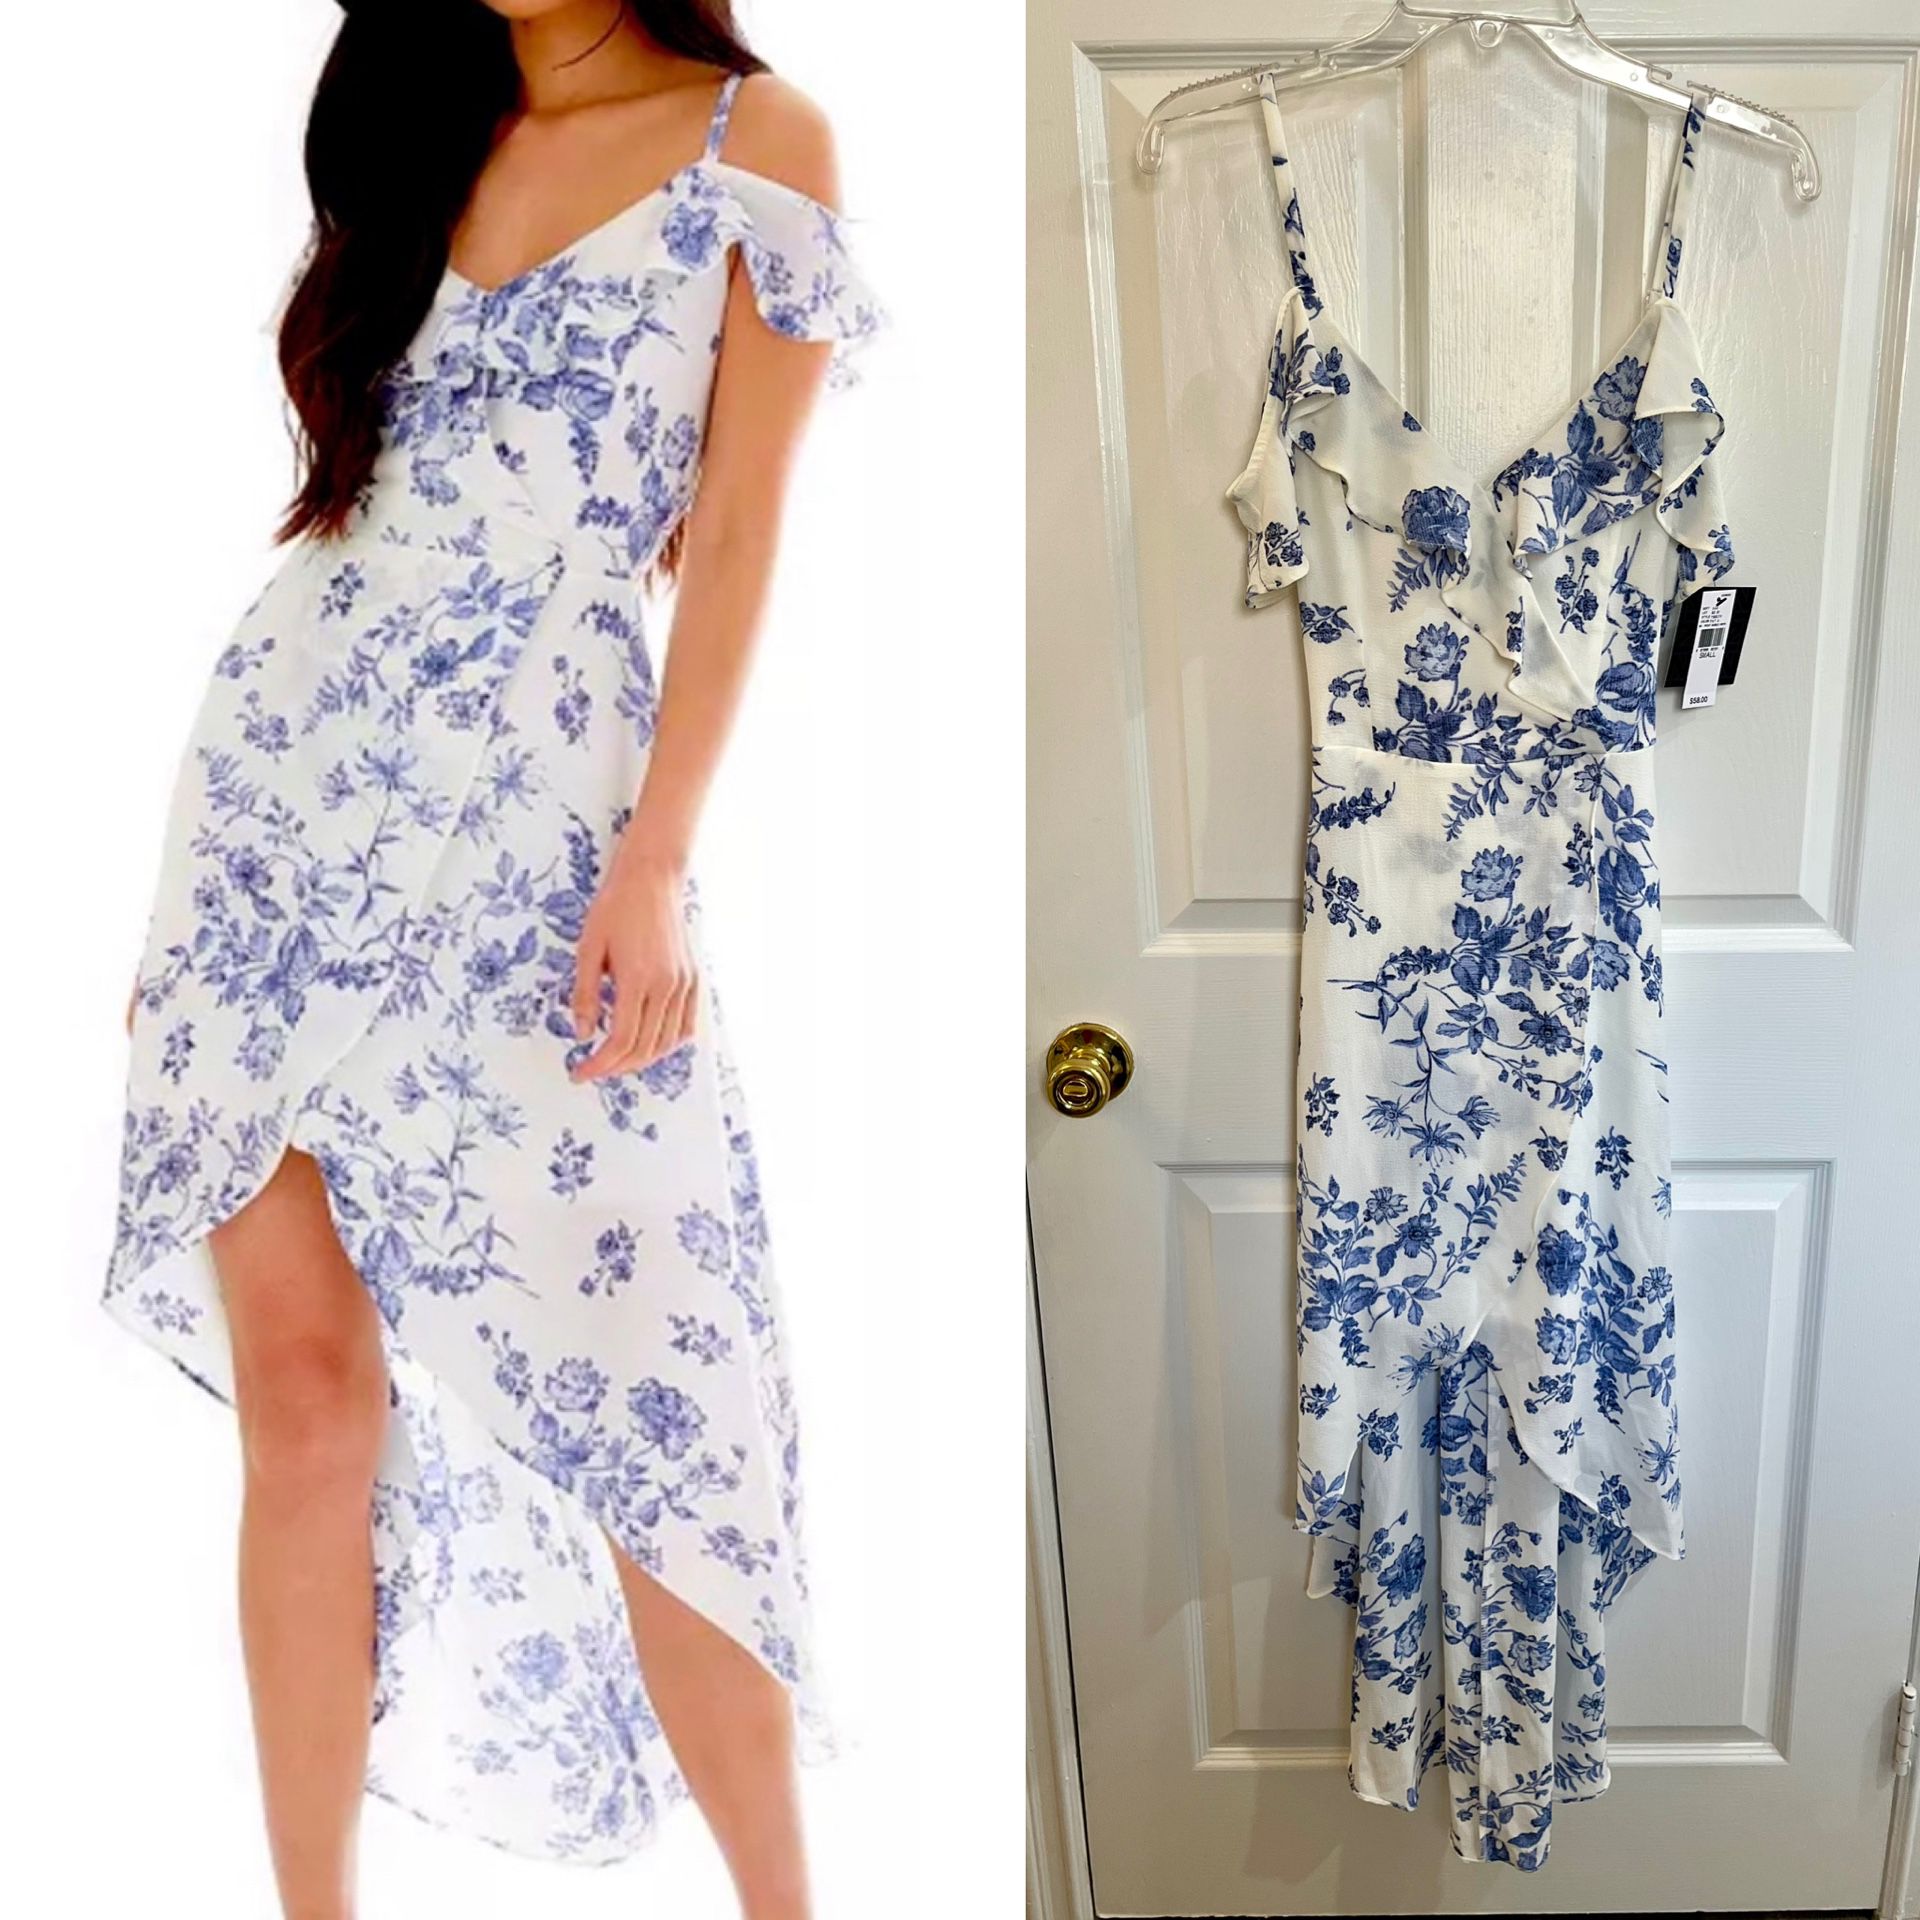 NWT High-Low Floral Dress - Size S